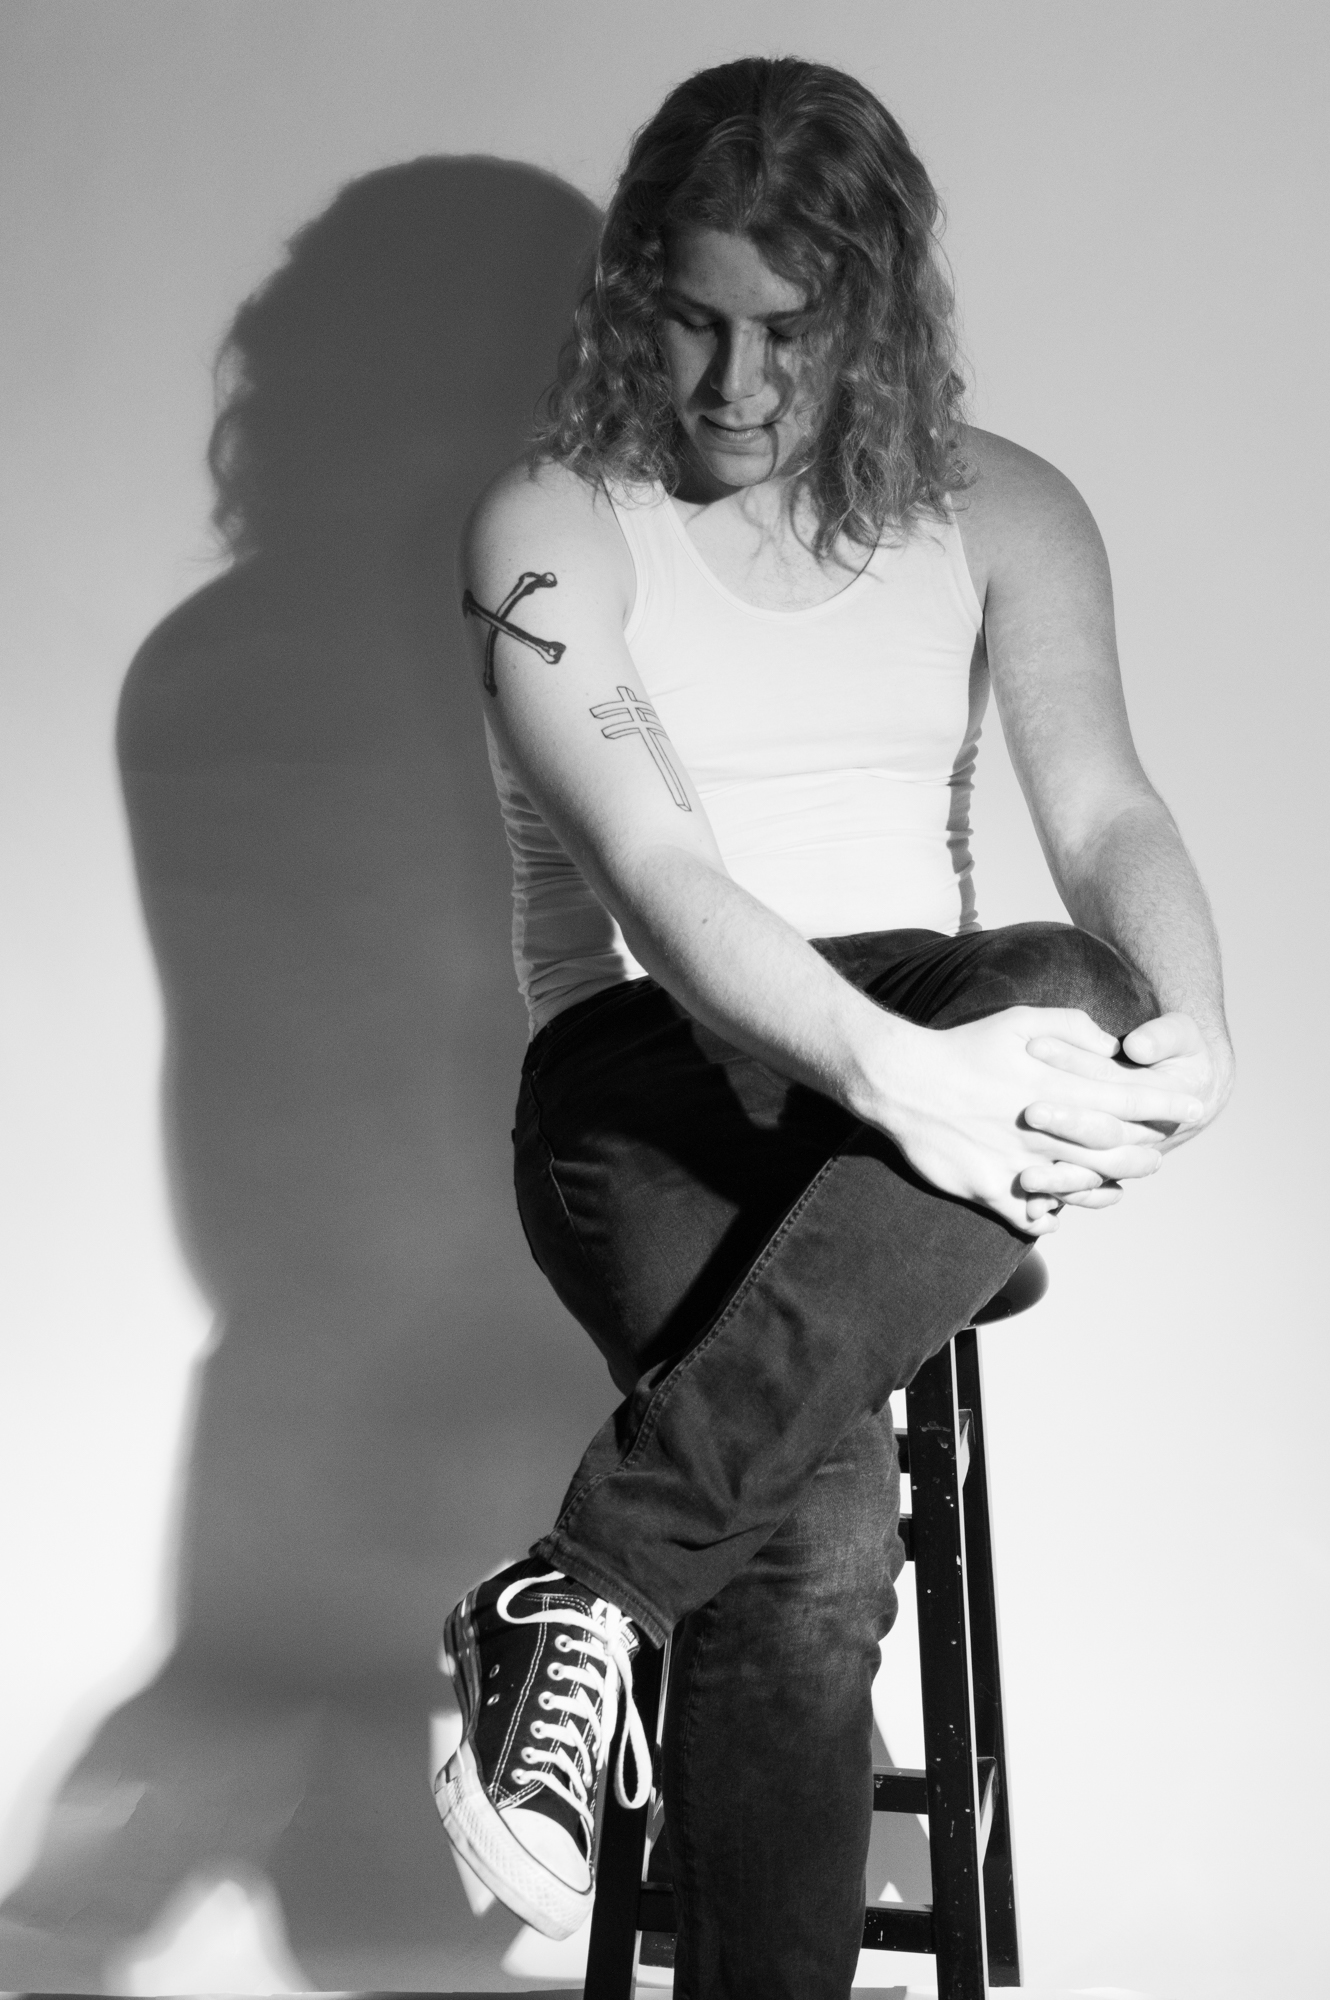 Black and white image of a tall, long-haired white male sitting on a stool with his legs crossed. Two tattoos visible on his right arm.